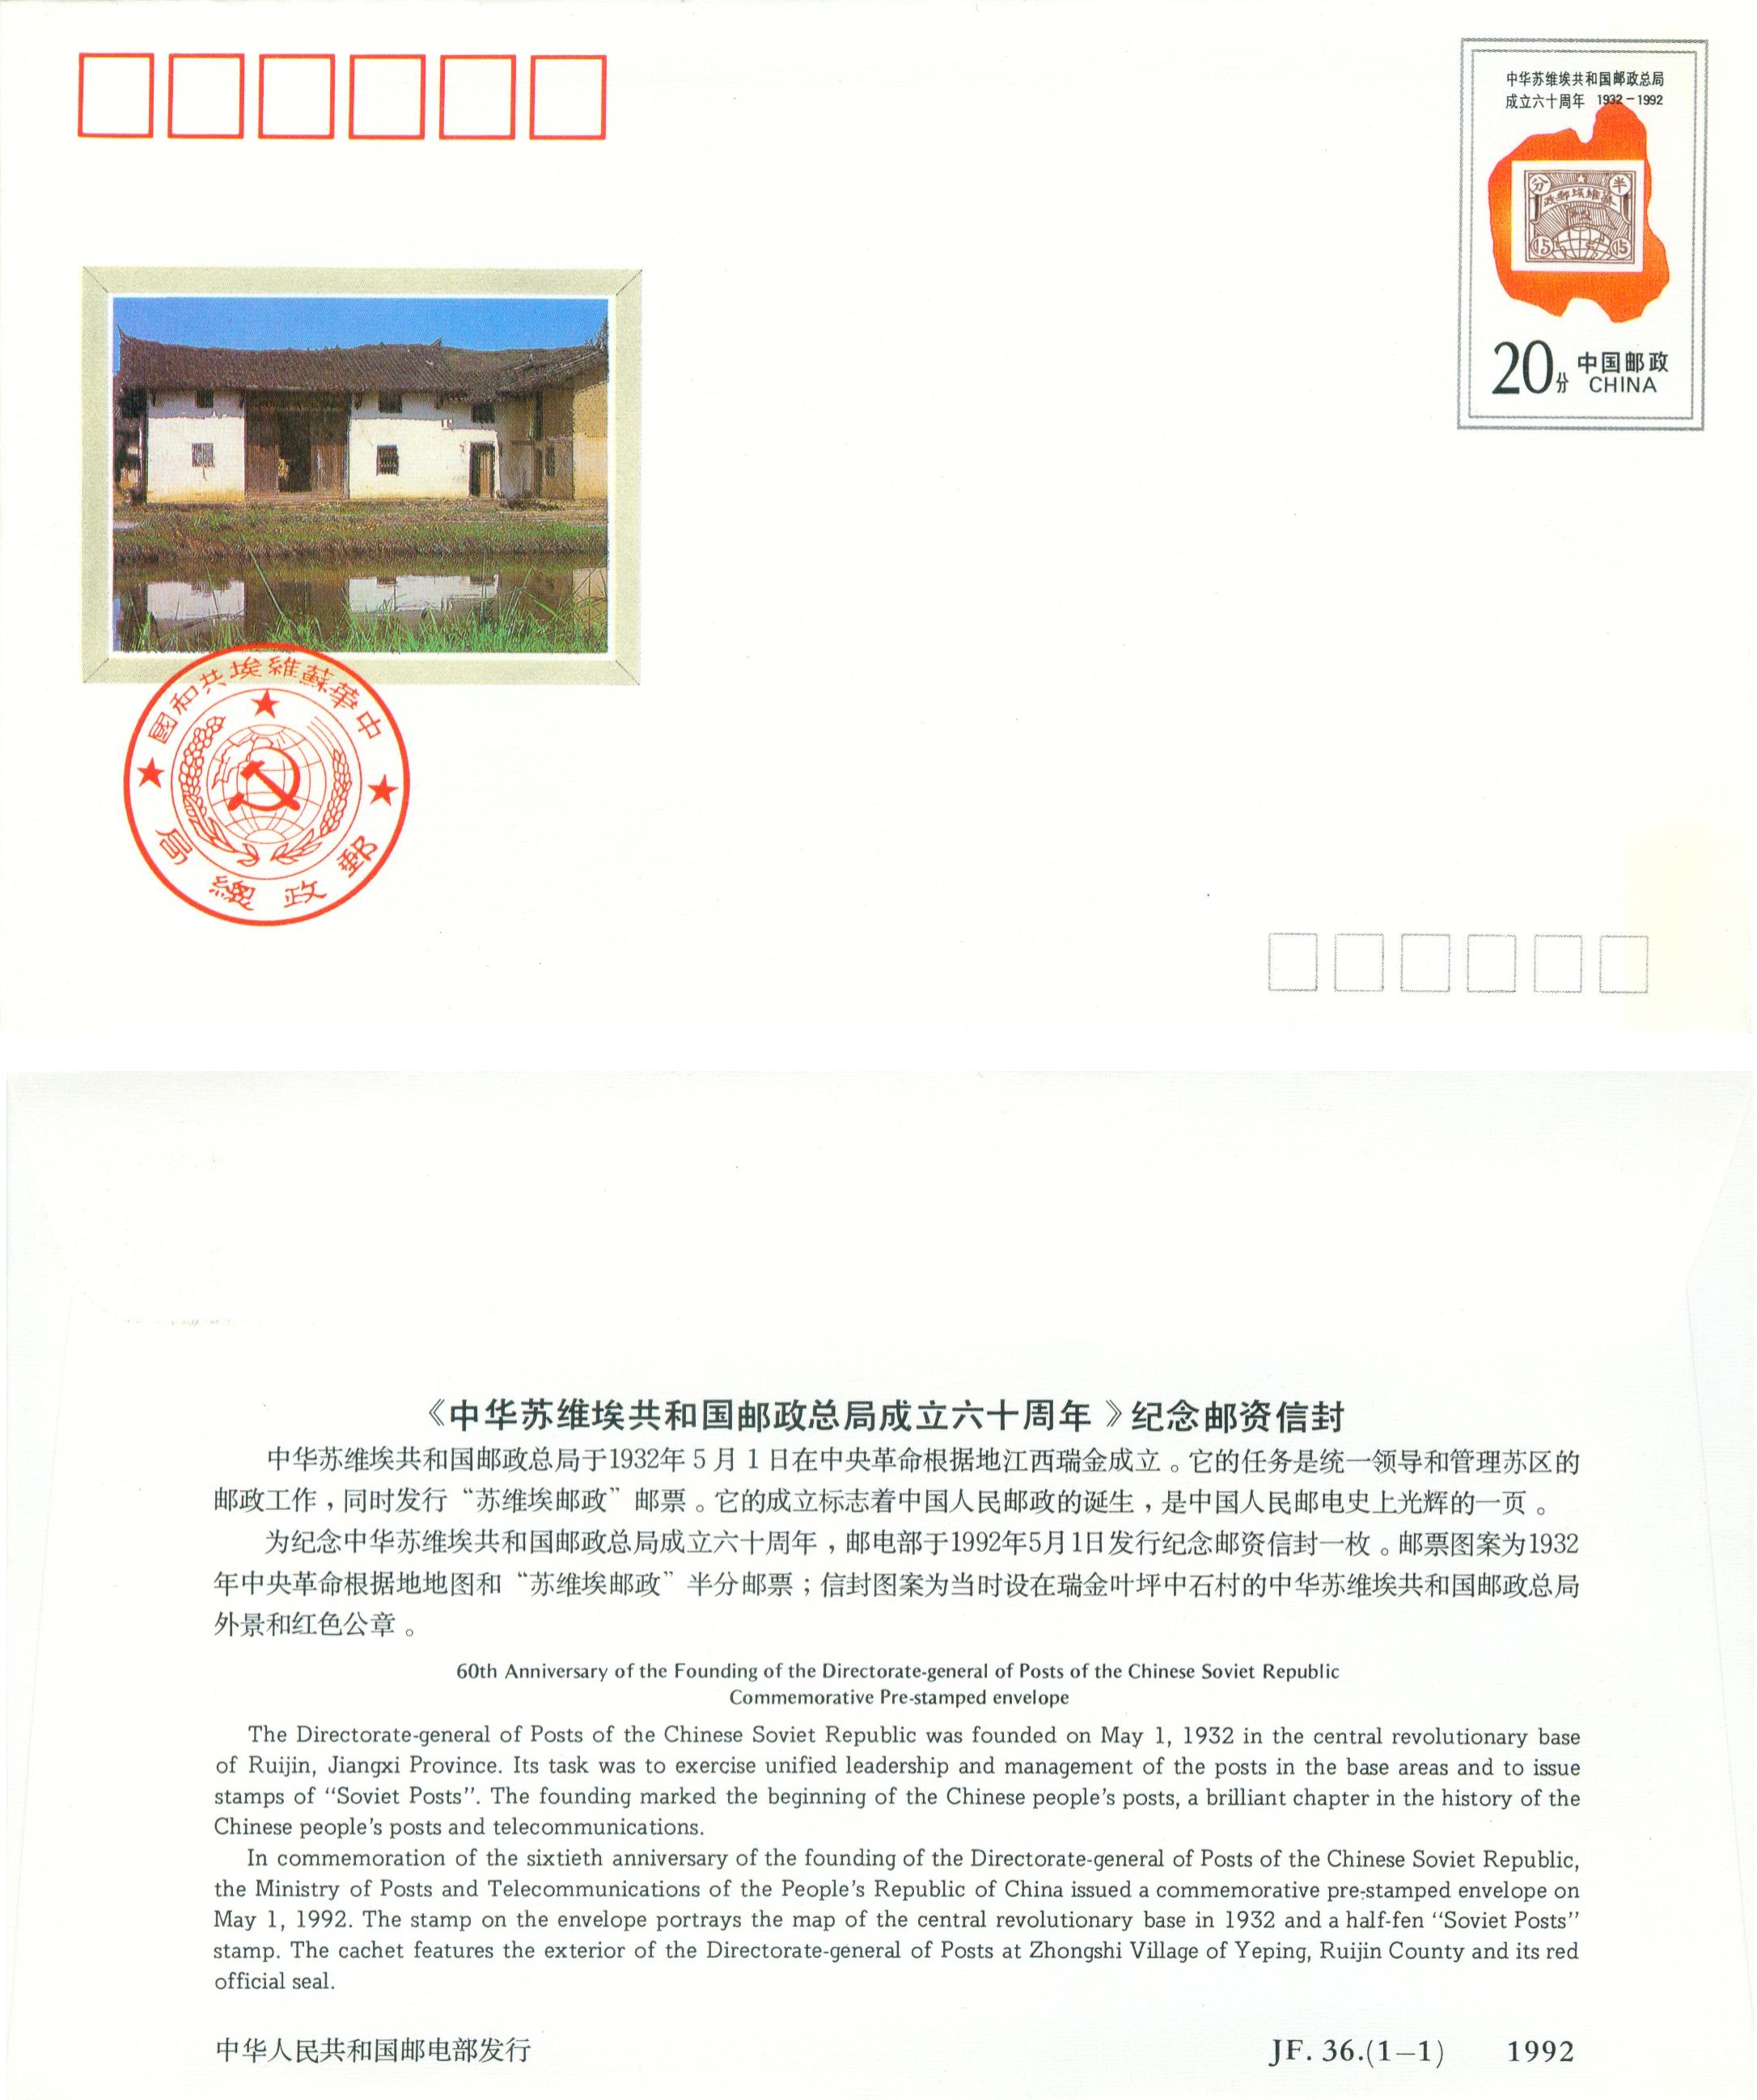 JF36, 60th Anniversary of the founding of the Directorate-General of Posts of the Chinese Soviet Republic 1992